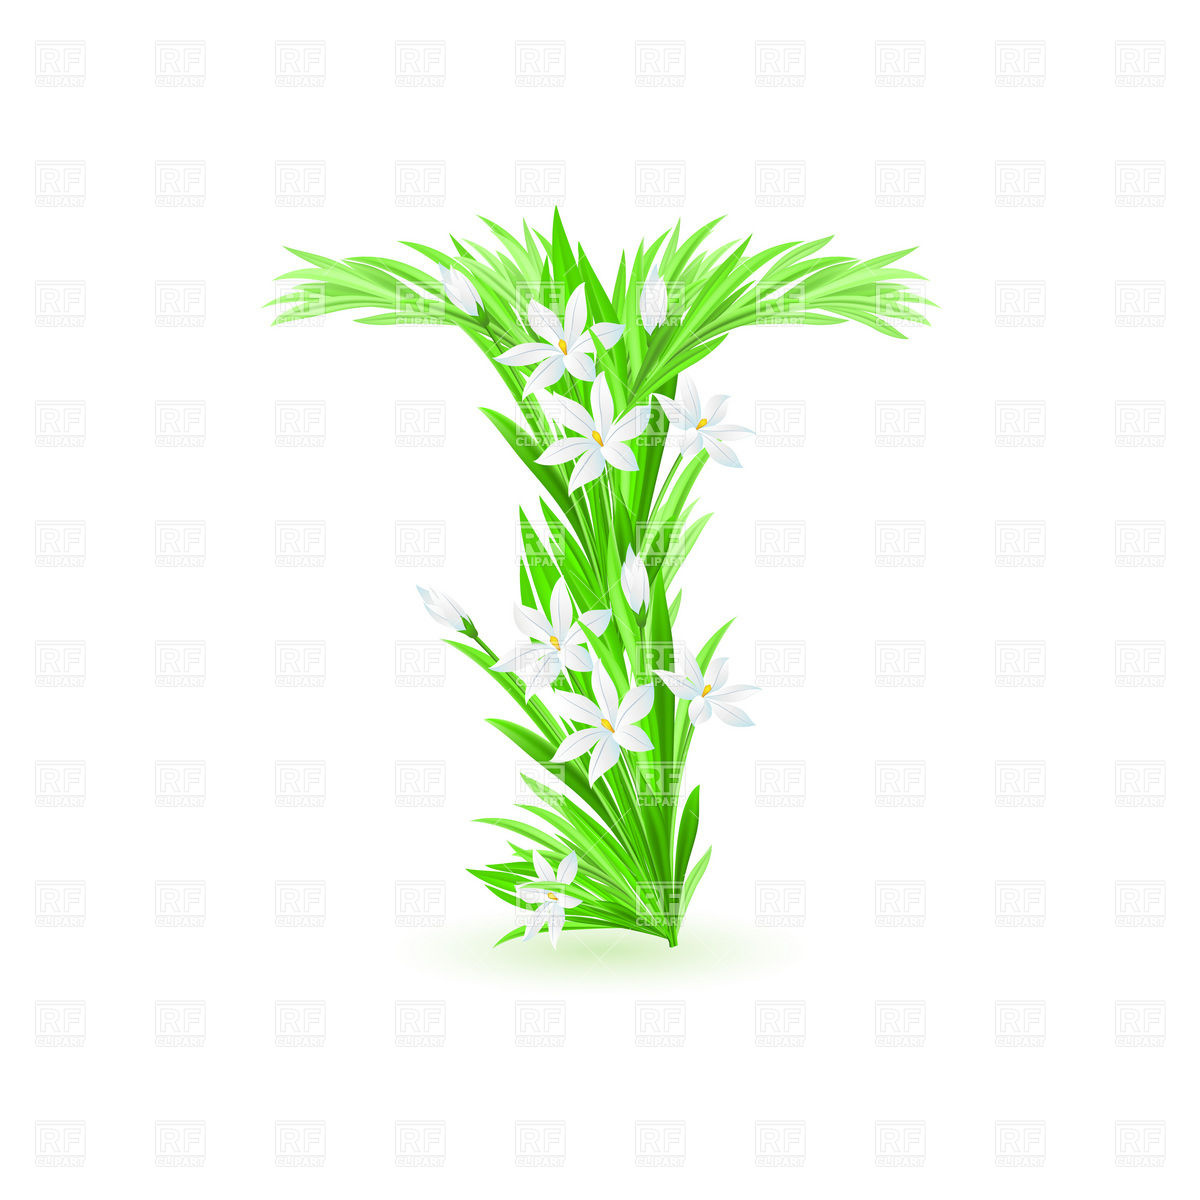 Grass And Spring Flowers Font Letter T 8373 Download Royalty Free